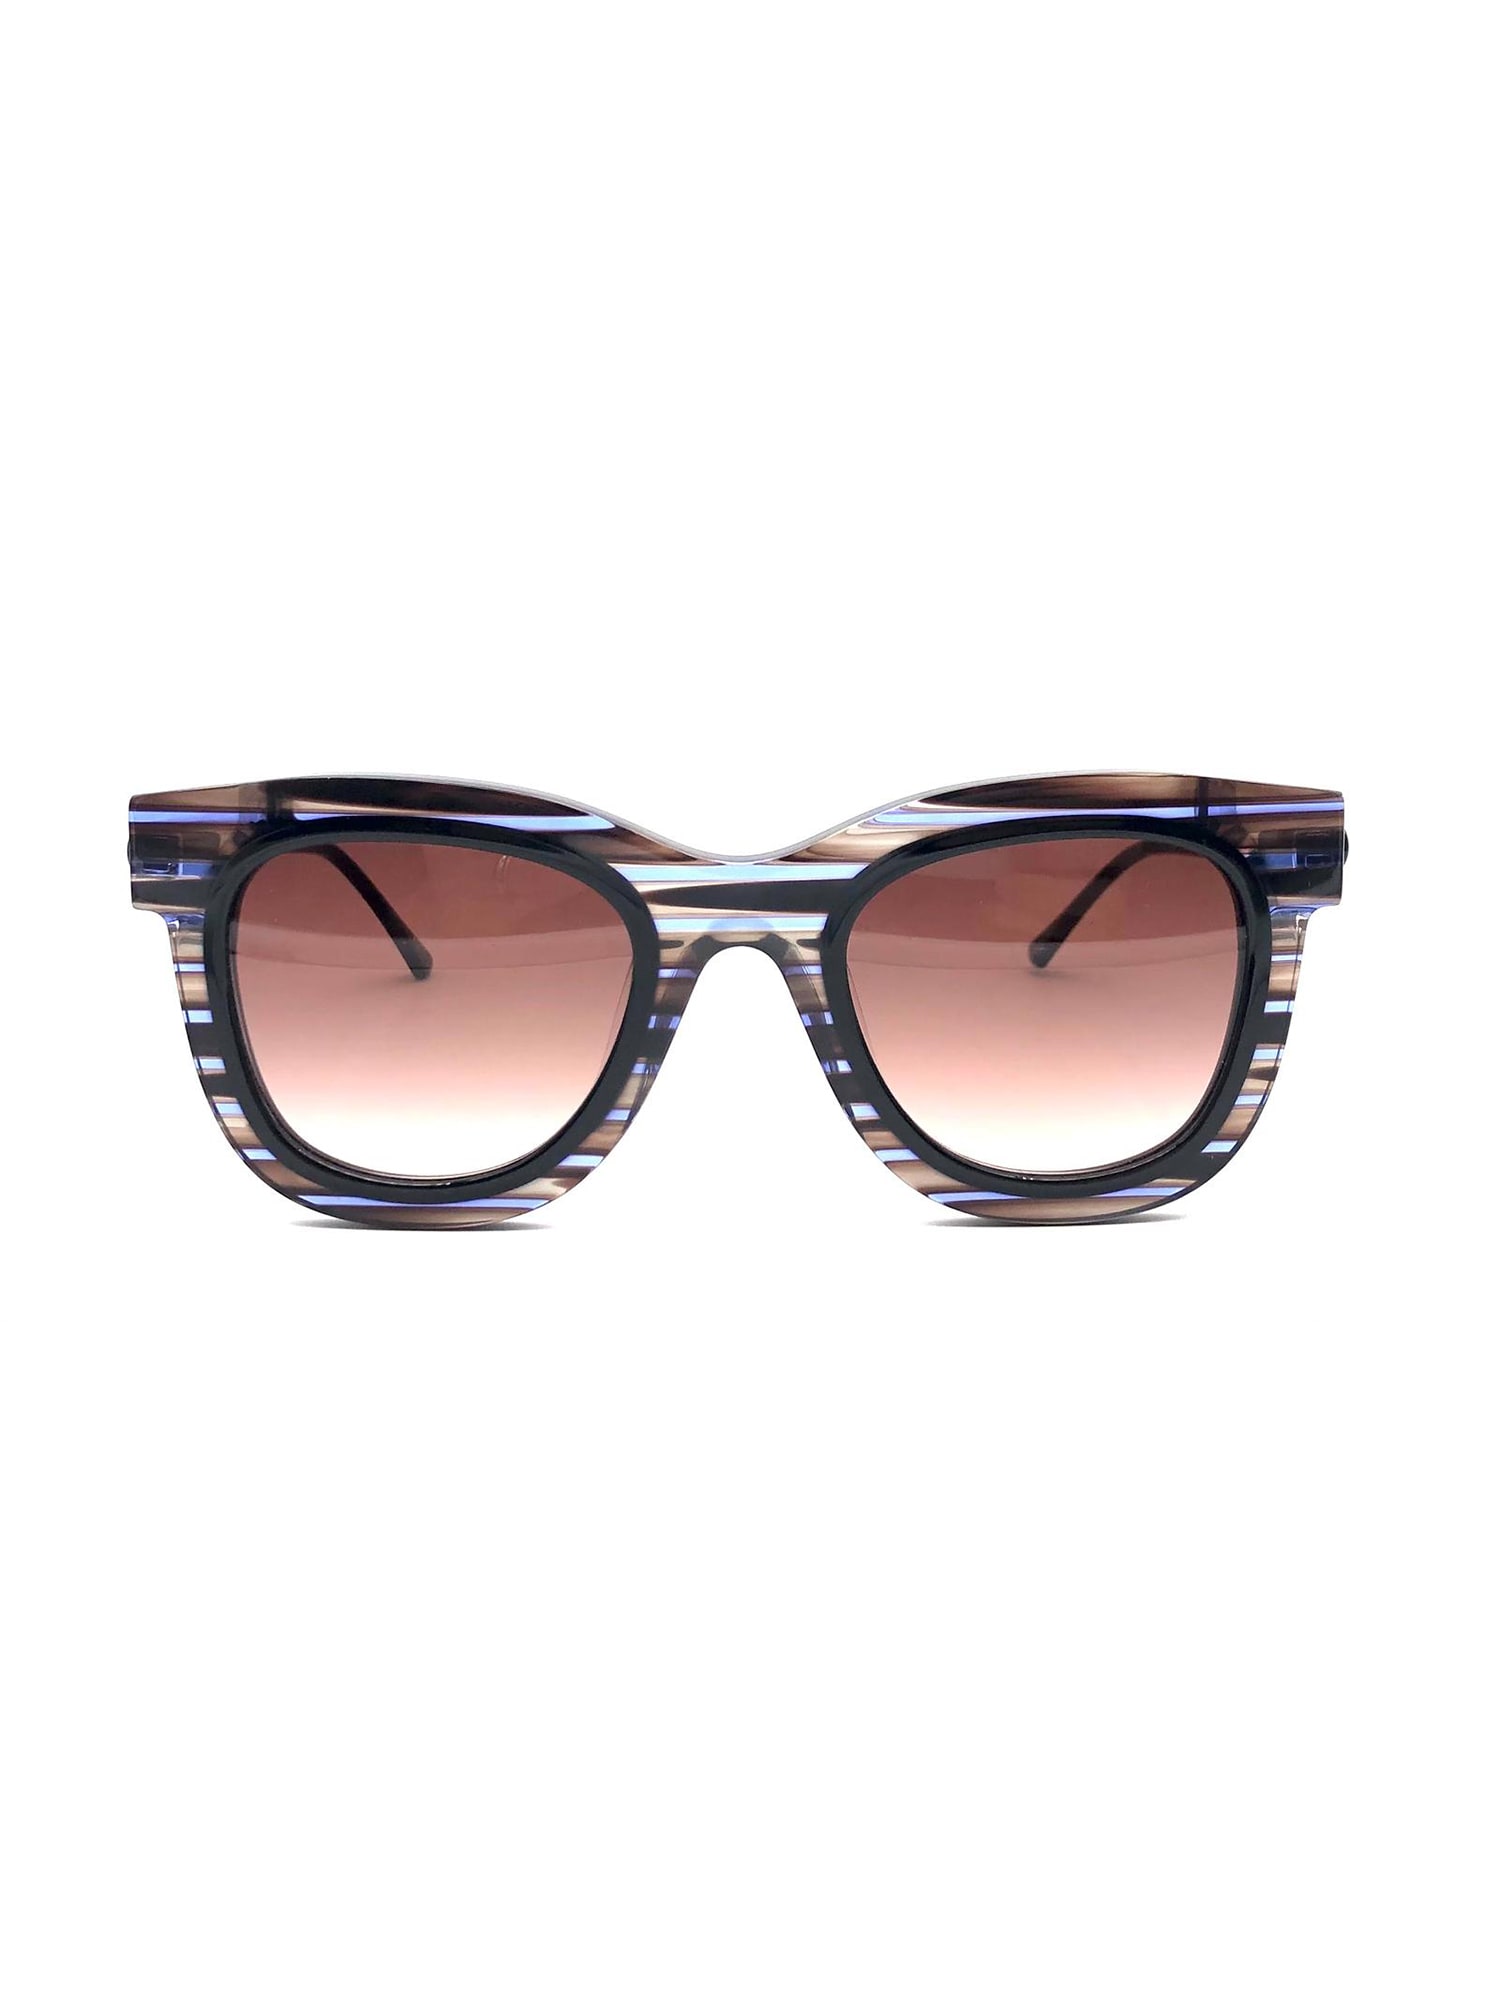 Thierry Lasry Elasty Sunglasses In Red